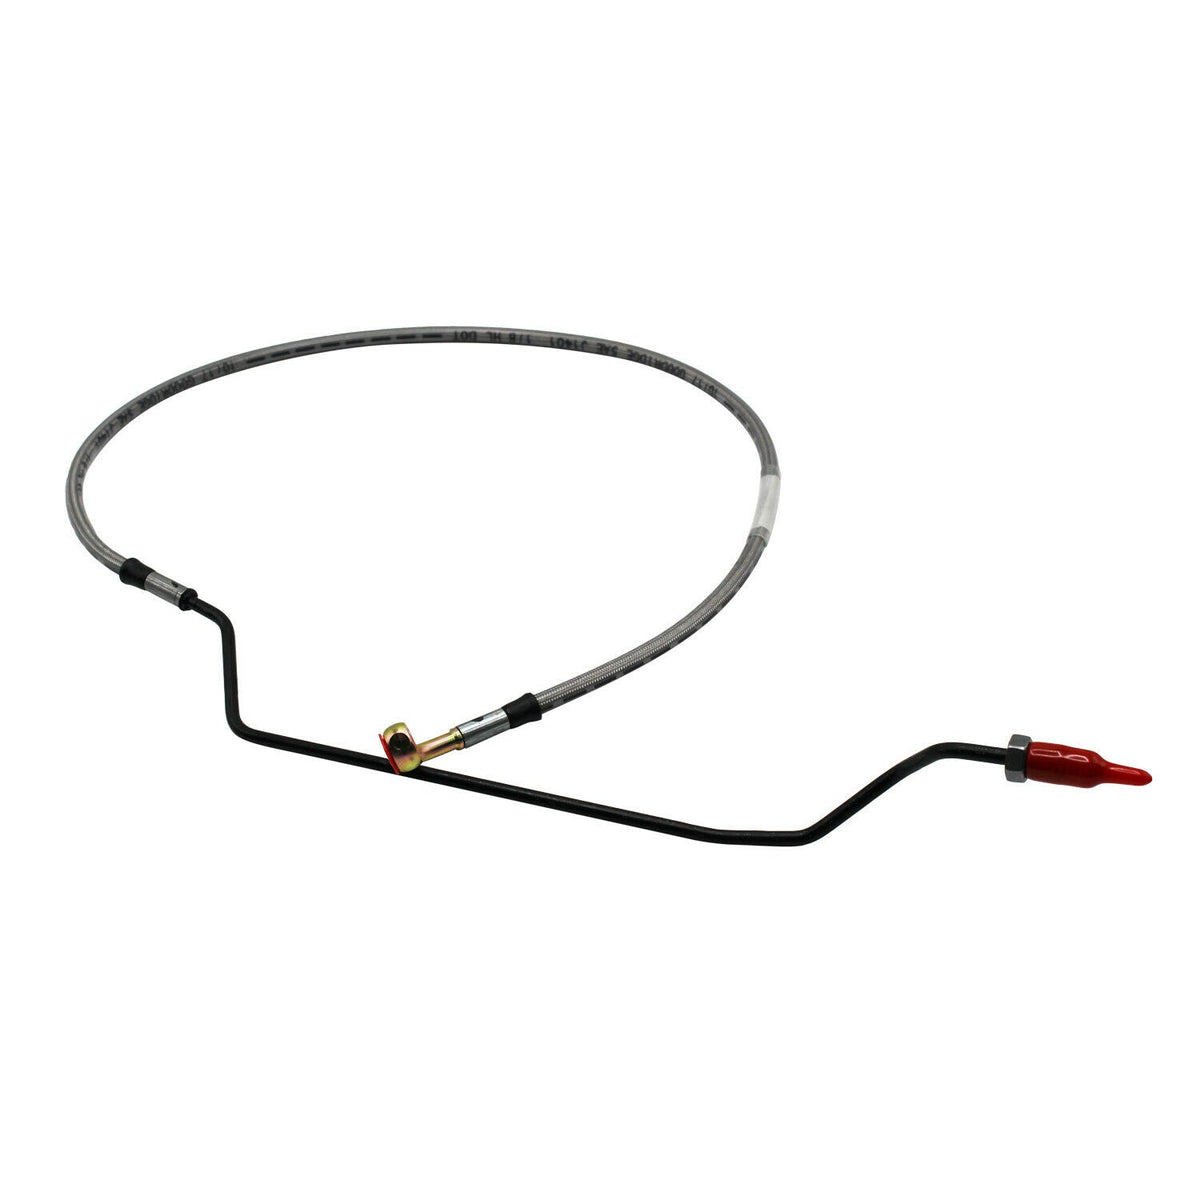 Indian Motorcycle Clutch Cable and ABS Brake Line Kit for Accessory Handlebars | 2884164